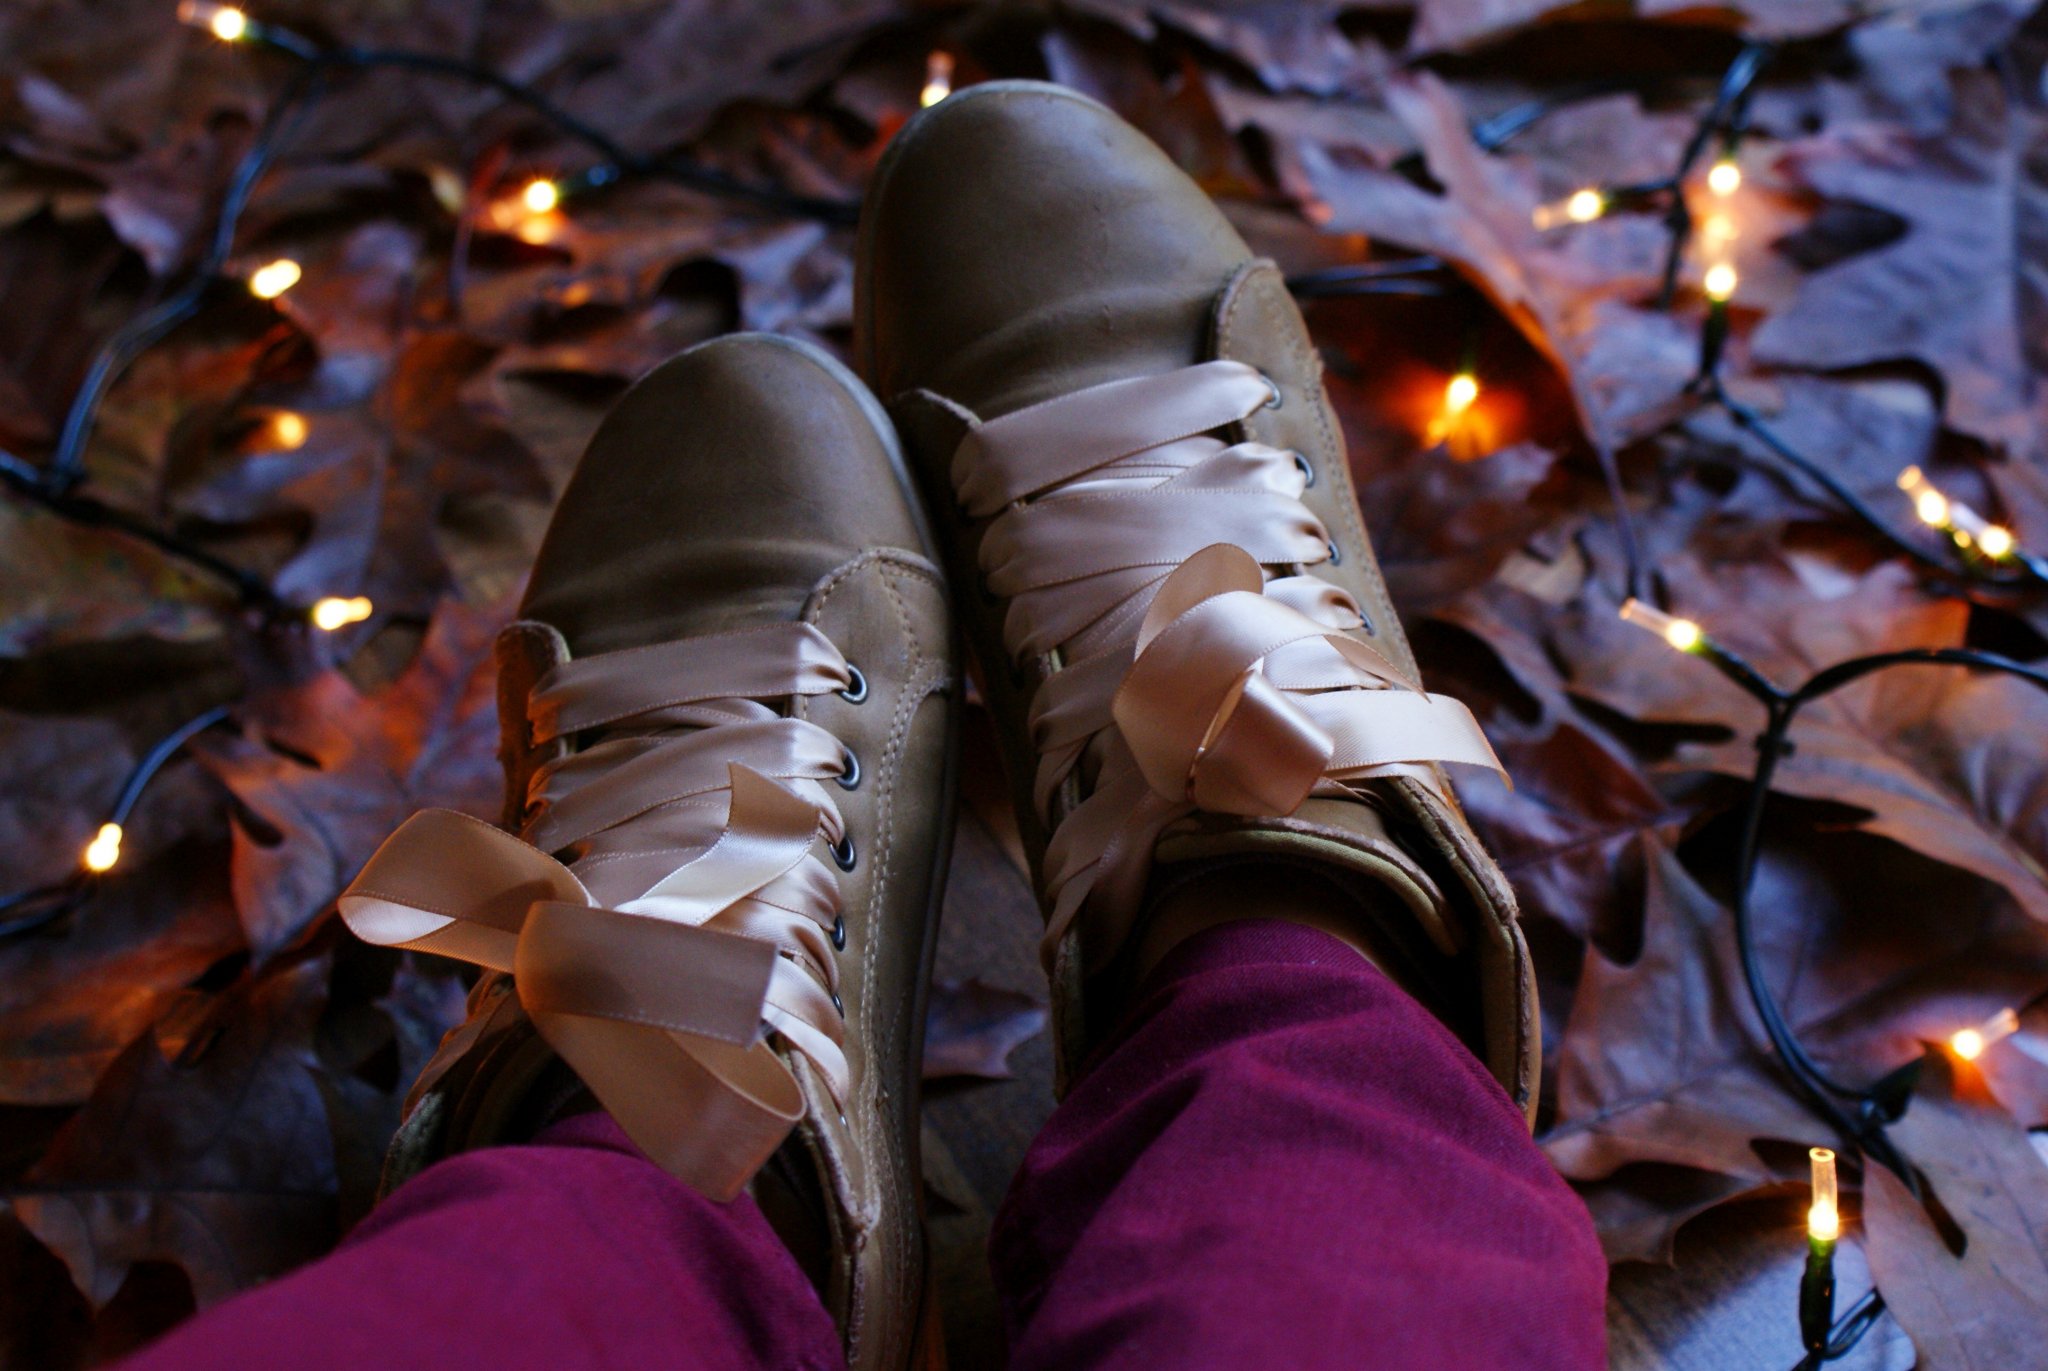 diy lace up ribbon sneakers